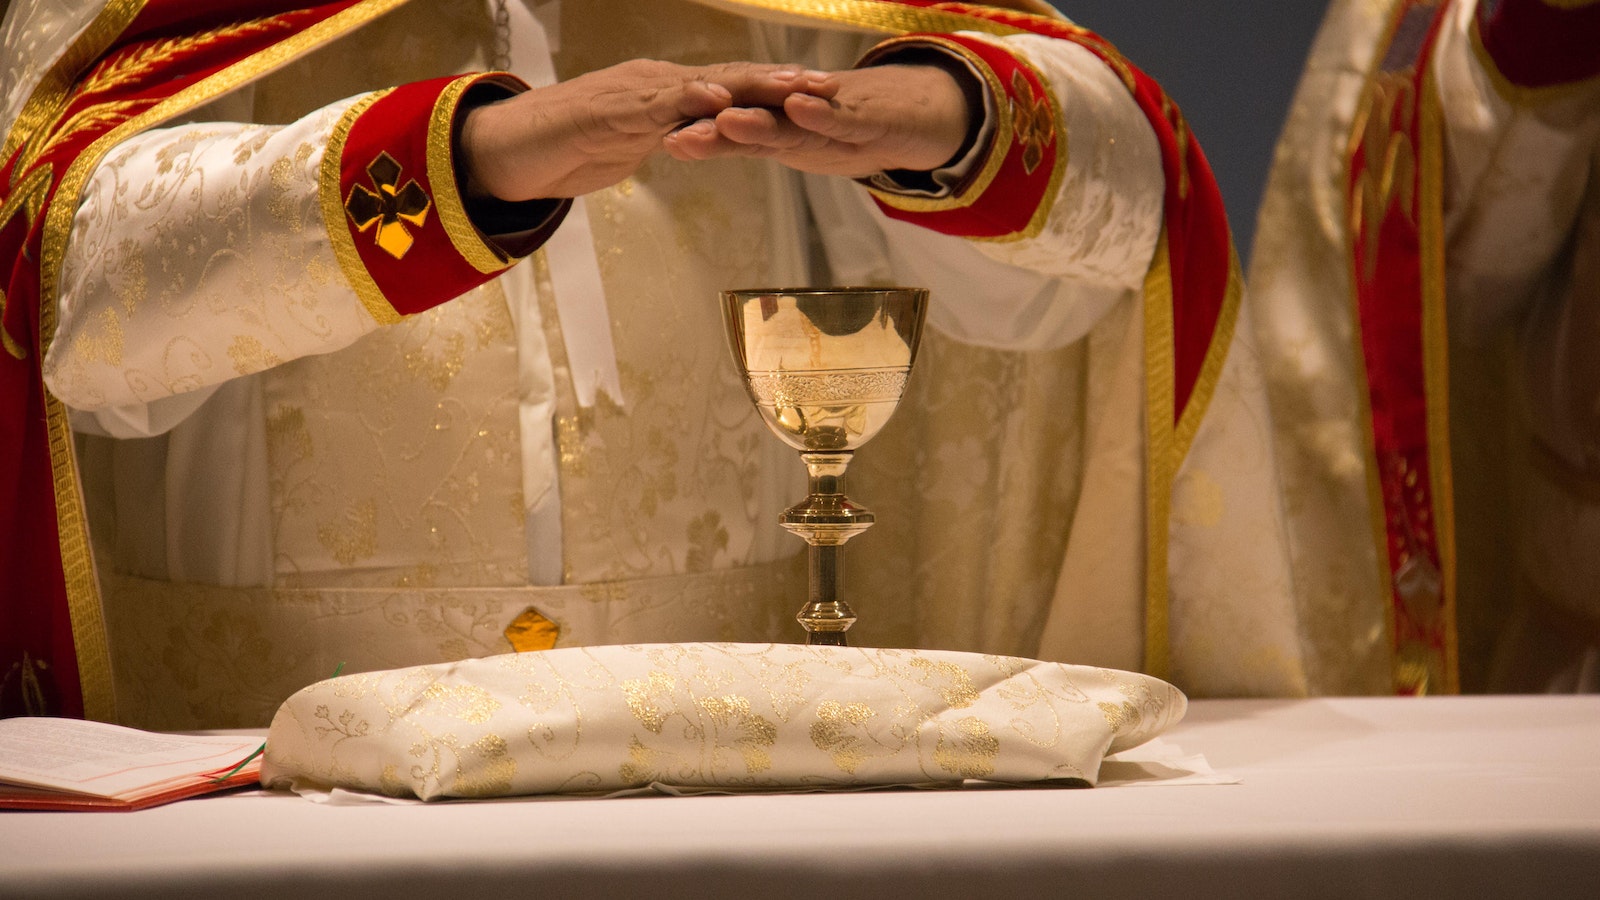 INDIVIDUALS & FAMILIES ARE NEEDED TO HOST THE TRAVELING VOCATIONS CHALICE